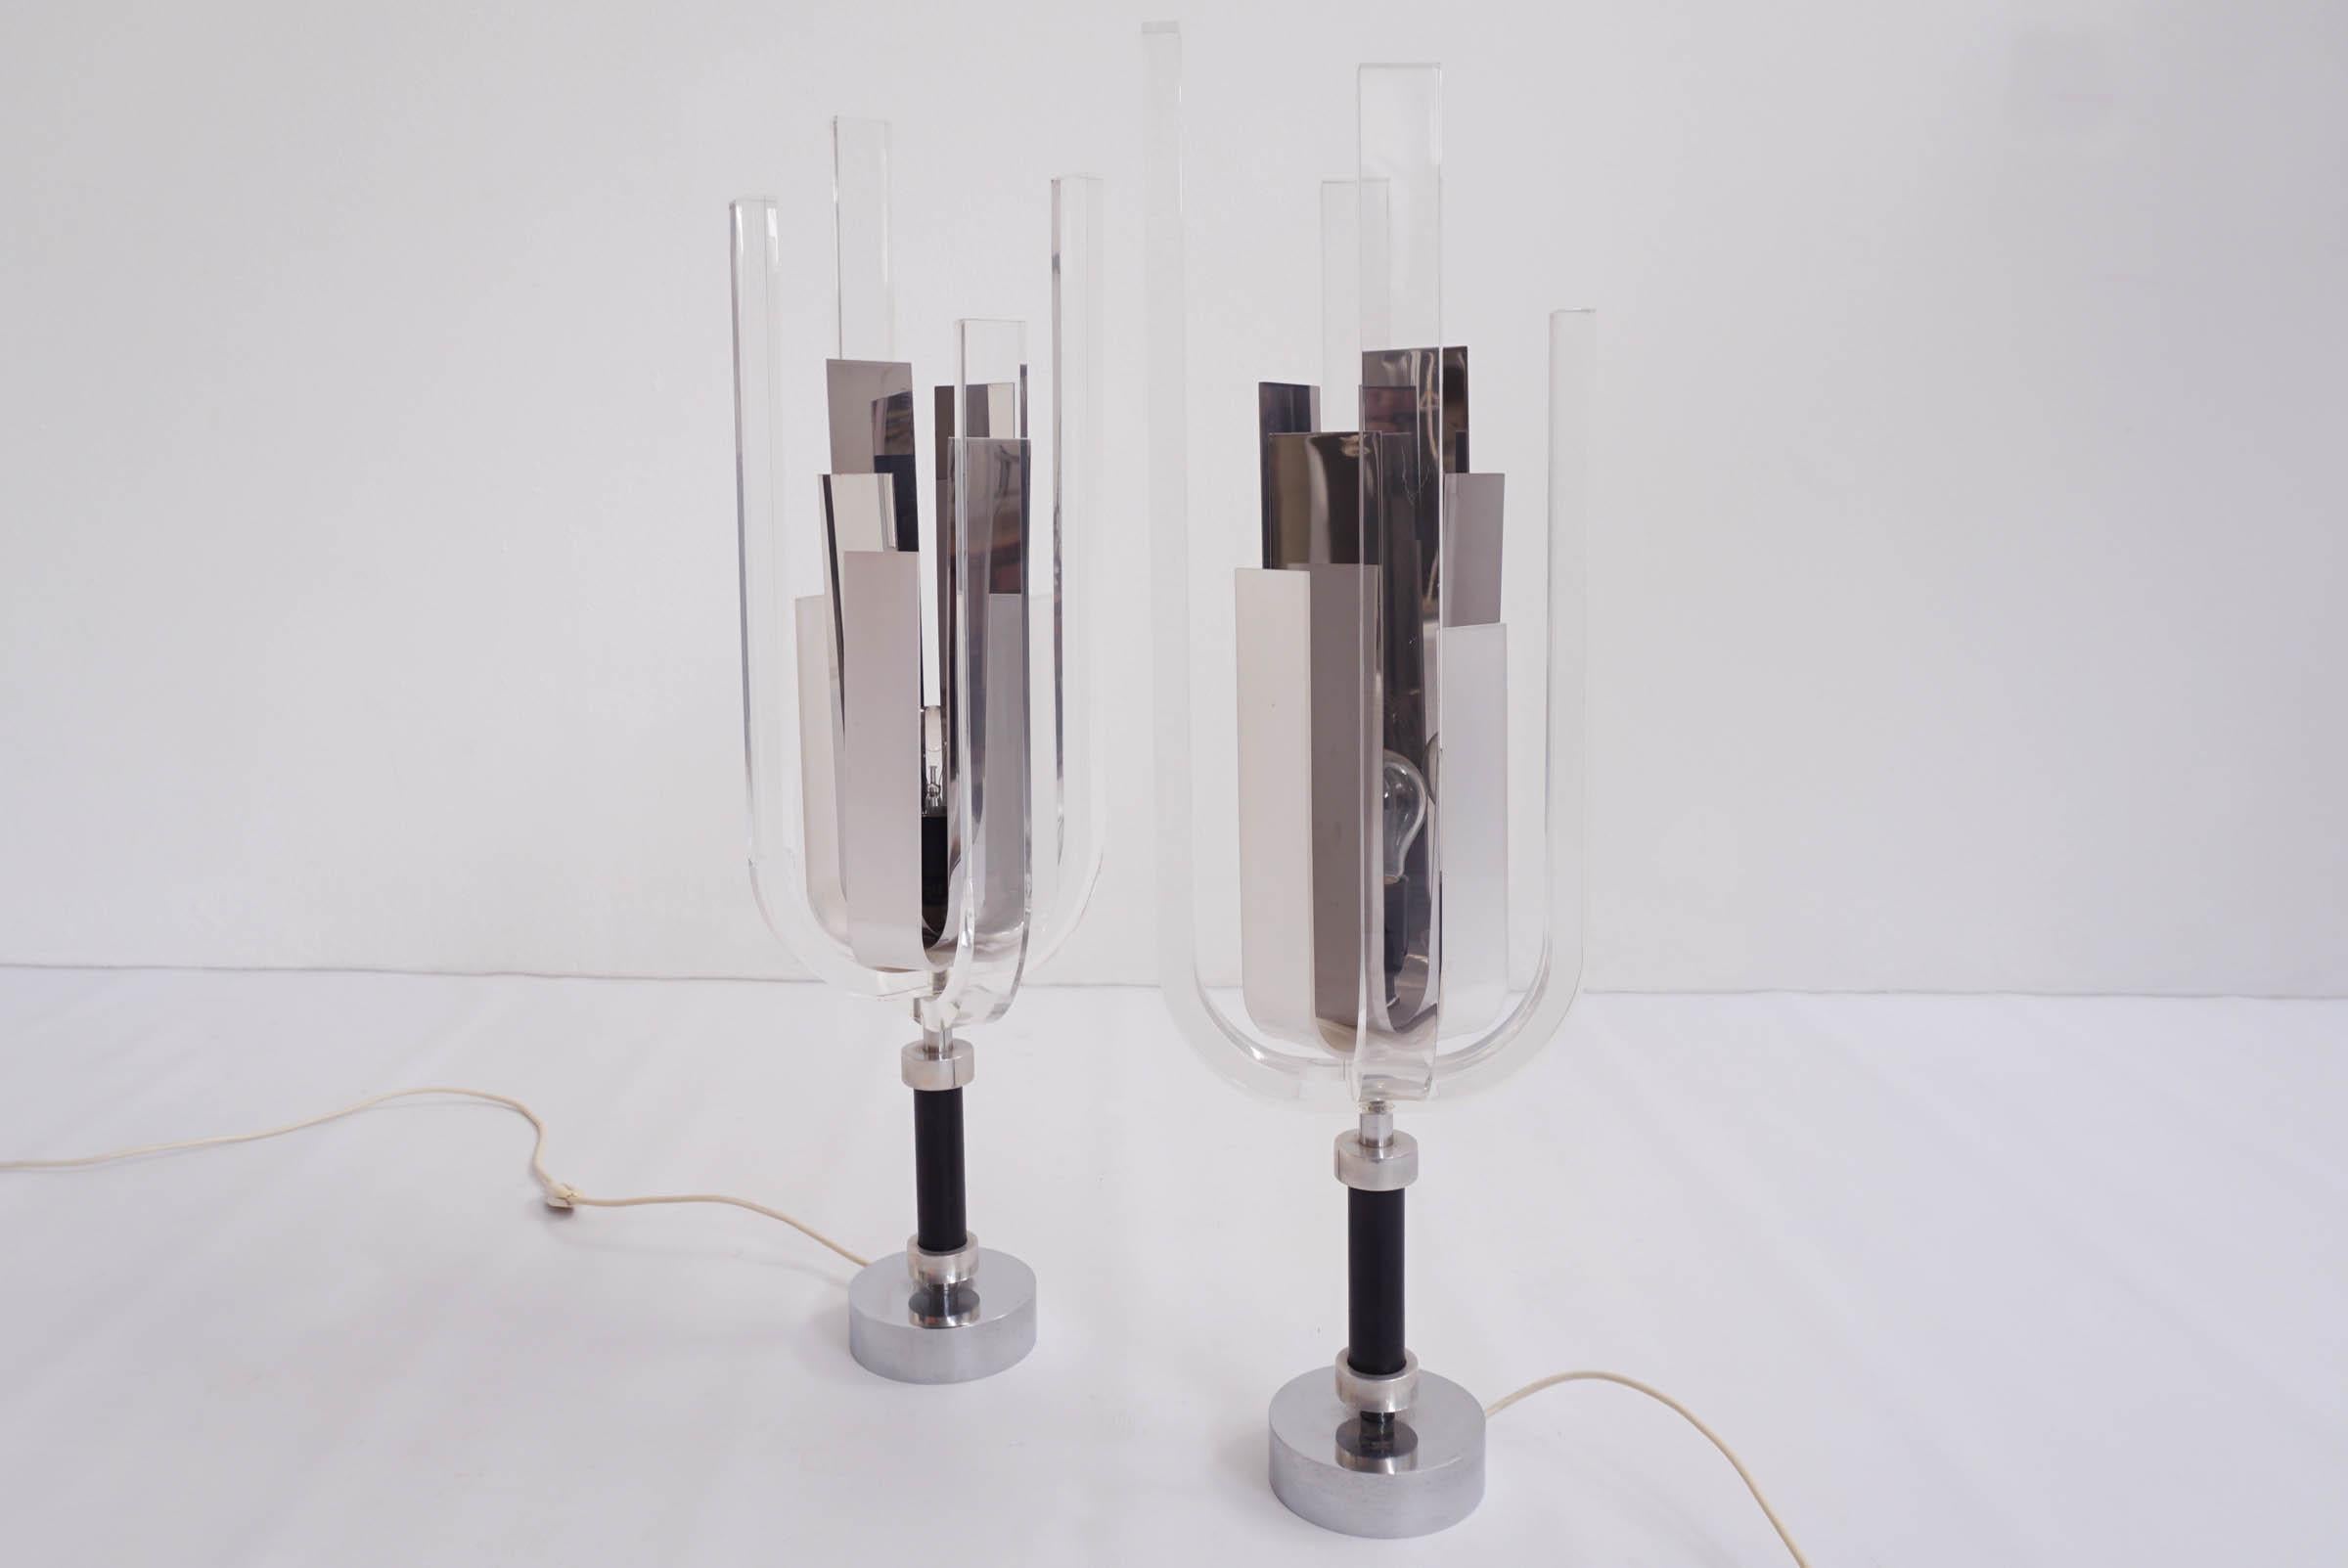 Shining plexi and chrome lamps designed by Philippe Jean, France, 1970
Stem is covered in leather
Signed by the Designer on the chrome base.